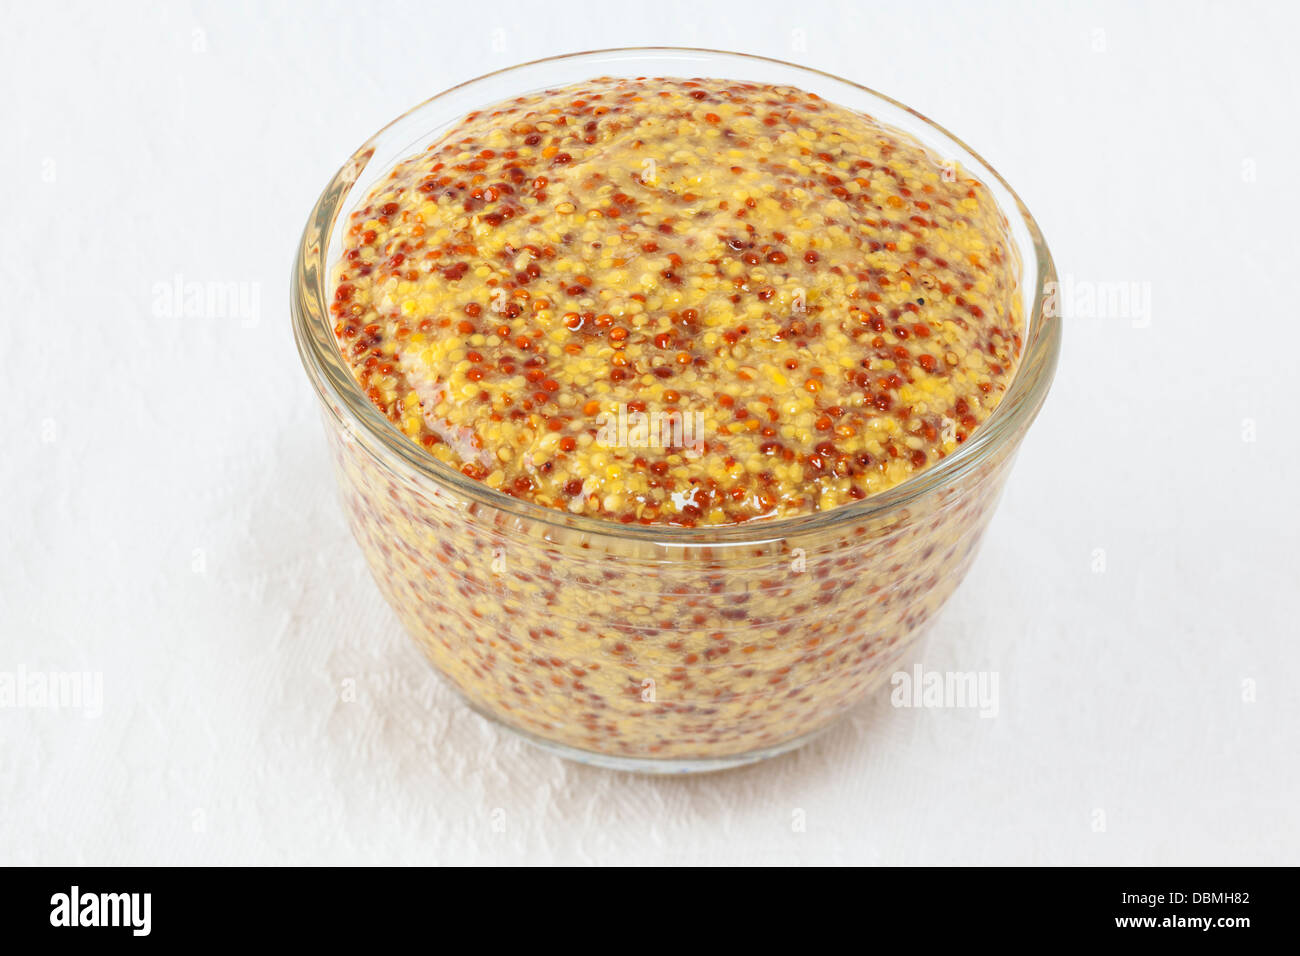 Wholegrain mustard in a small glass dish on a white textured cloth background. Stock Photo